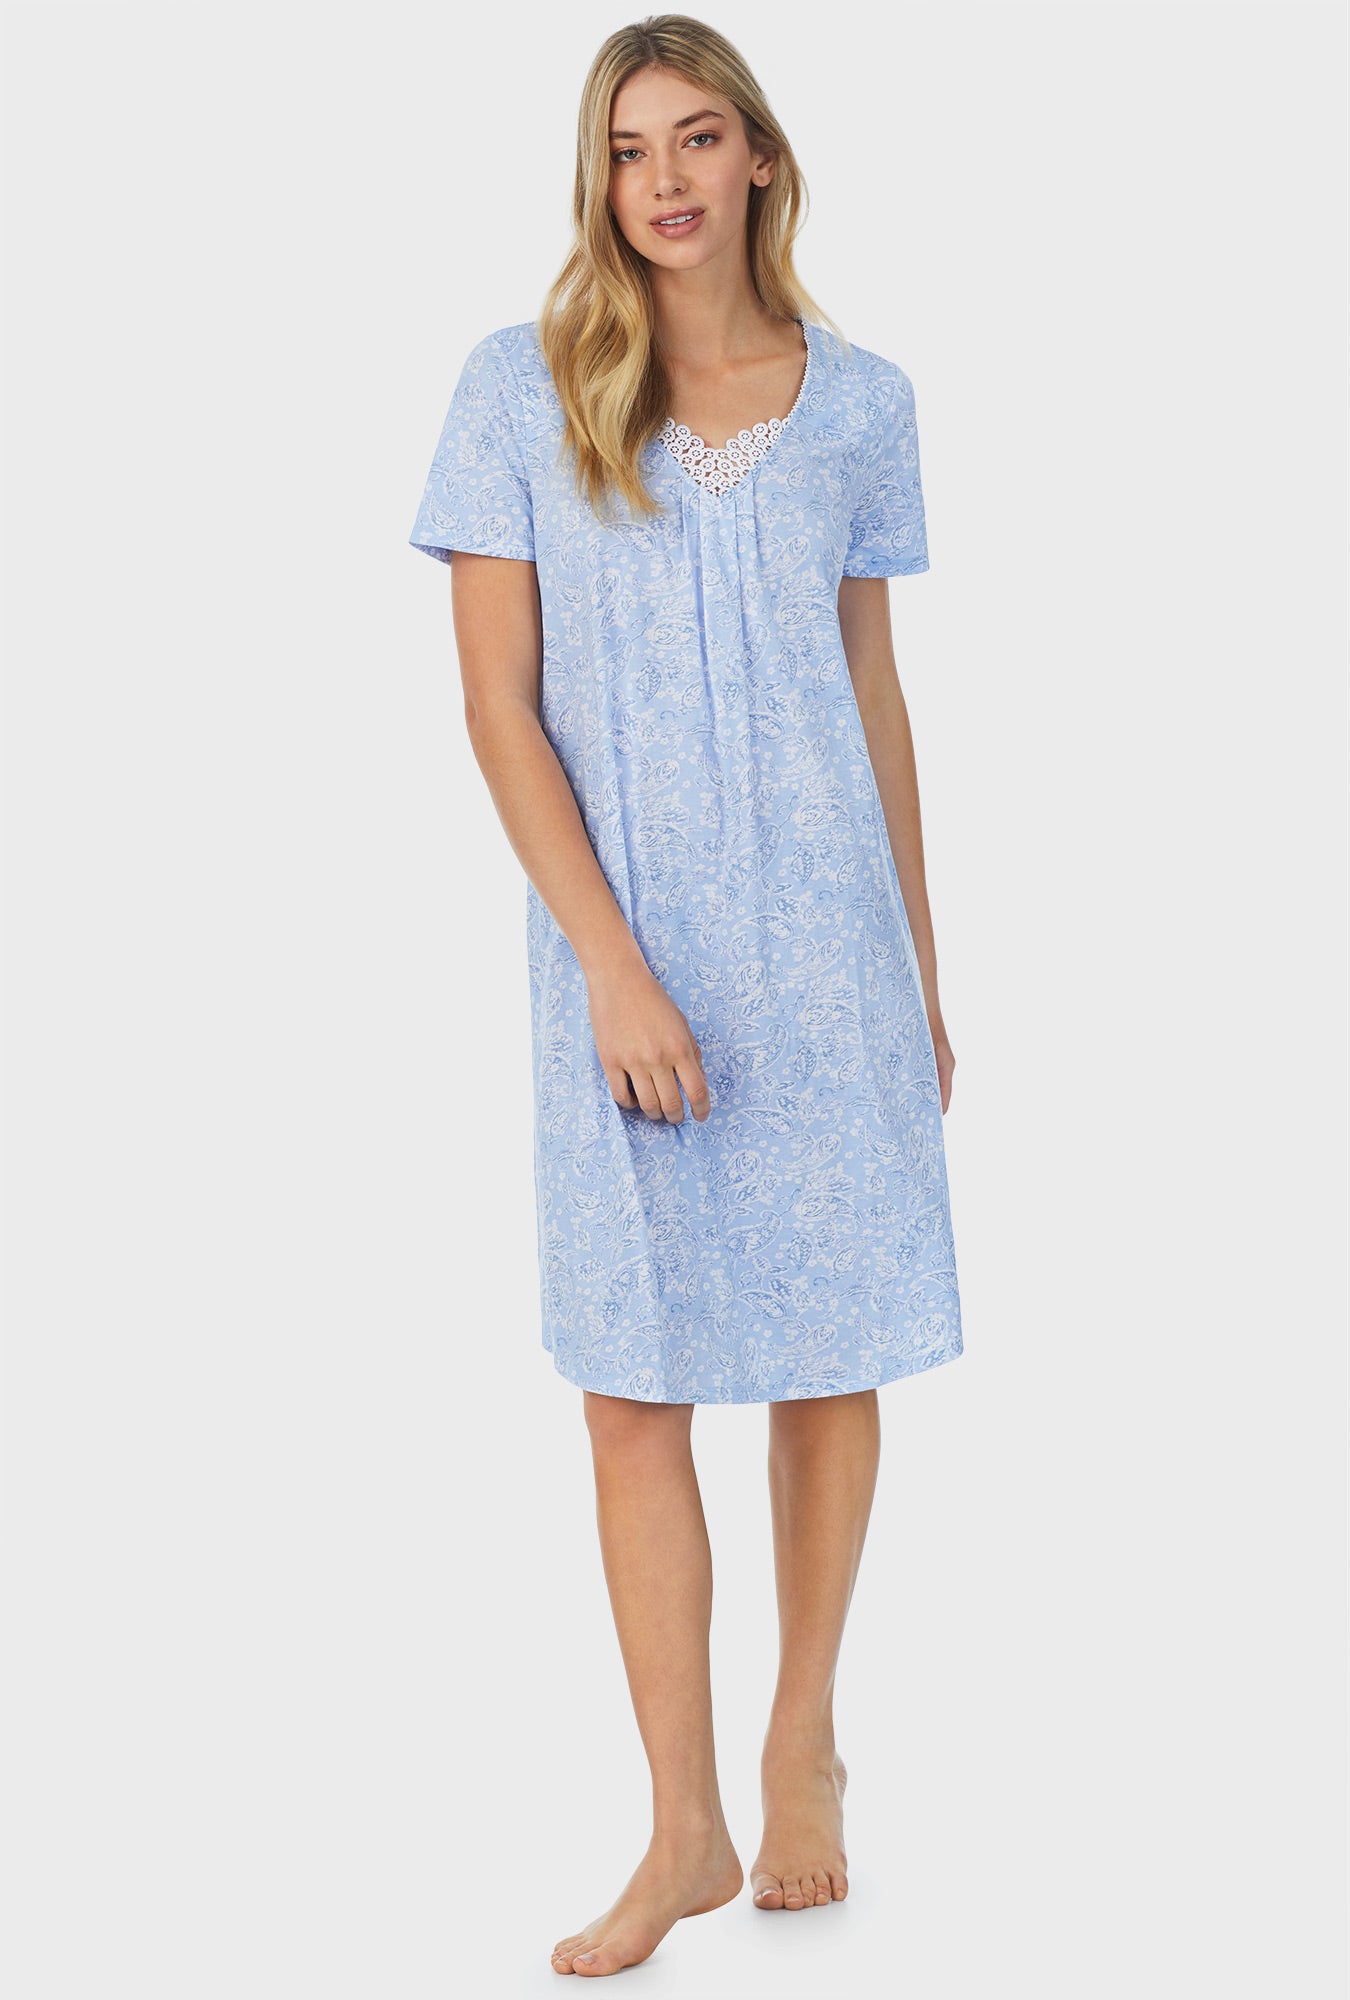 A lady wearing blue short sleeve waltz nightgown with blooming paisley print.